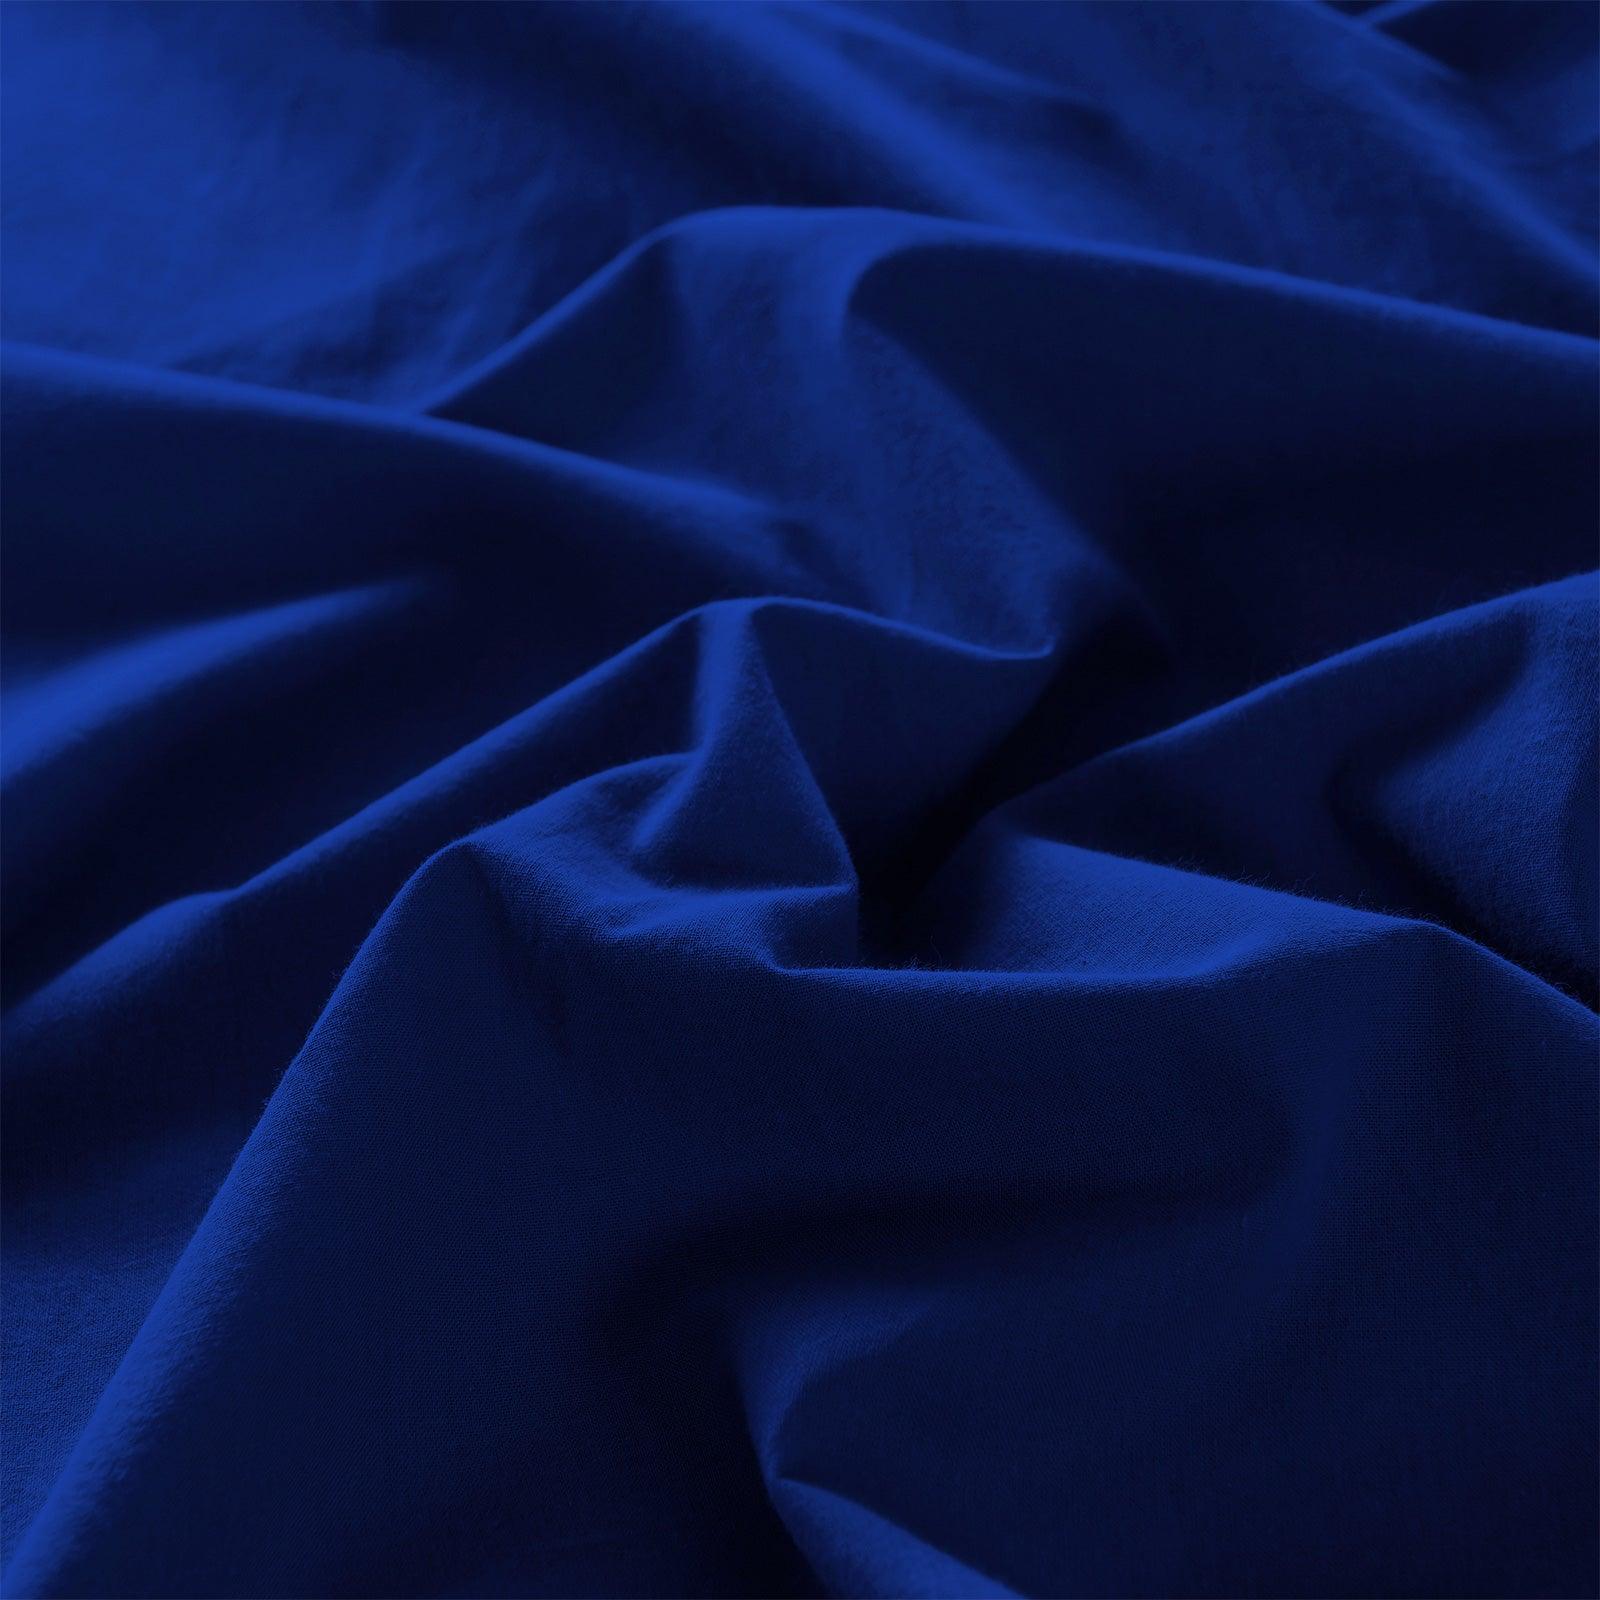 Royal Comfort Vintage Washed 100% Cotton Sheet Set Fitted Flat Sheet Pillowcases - Queen - Royal Blue